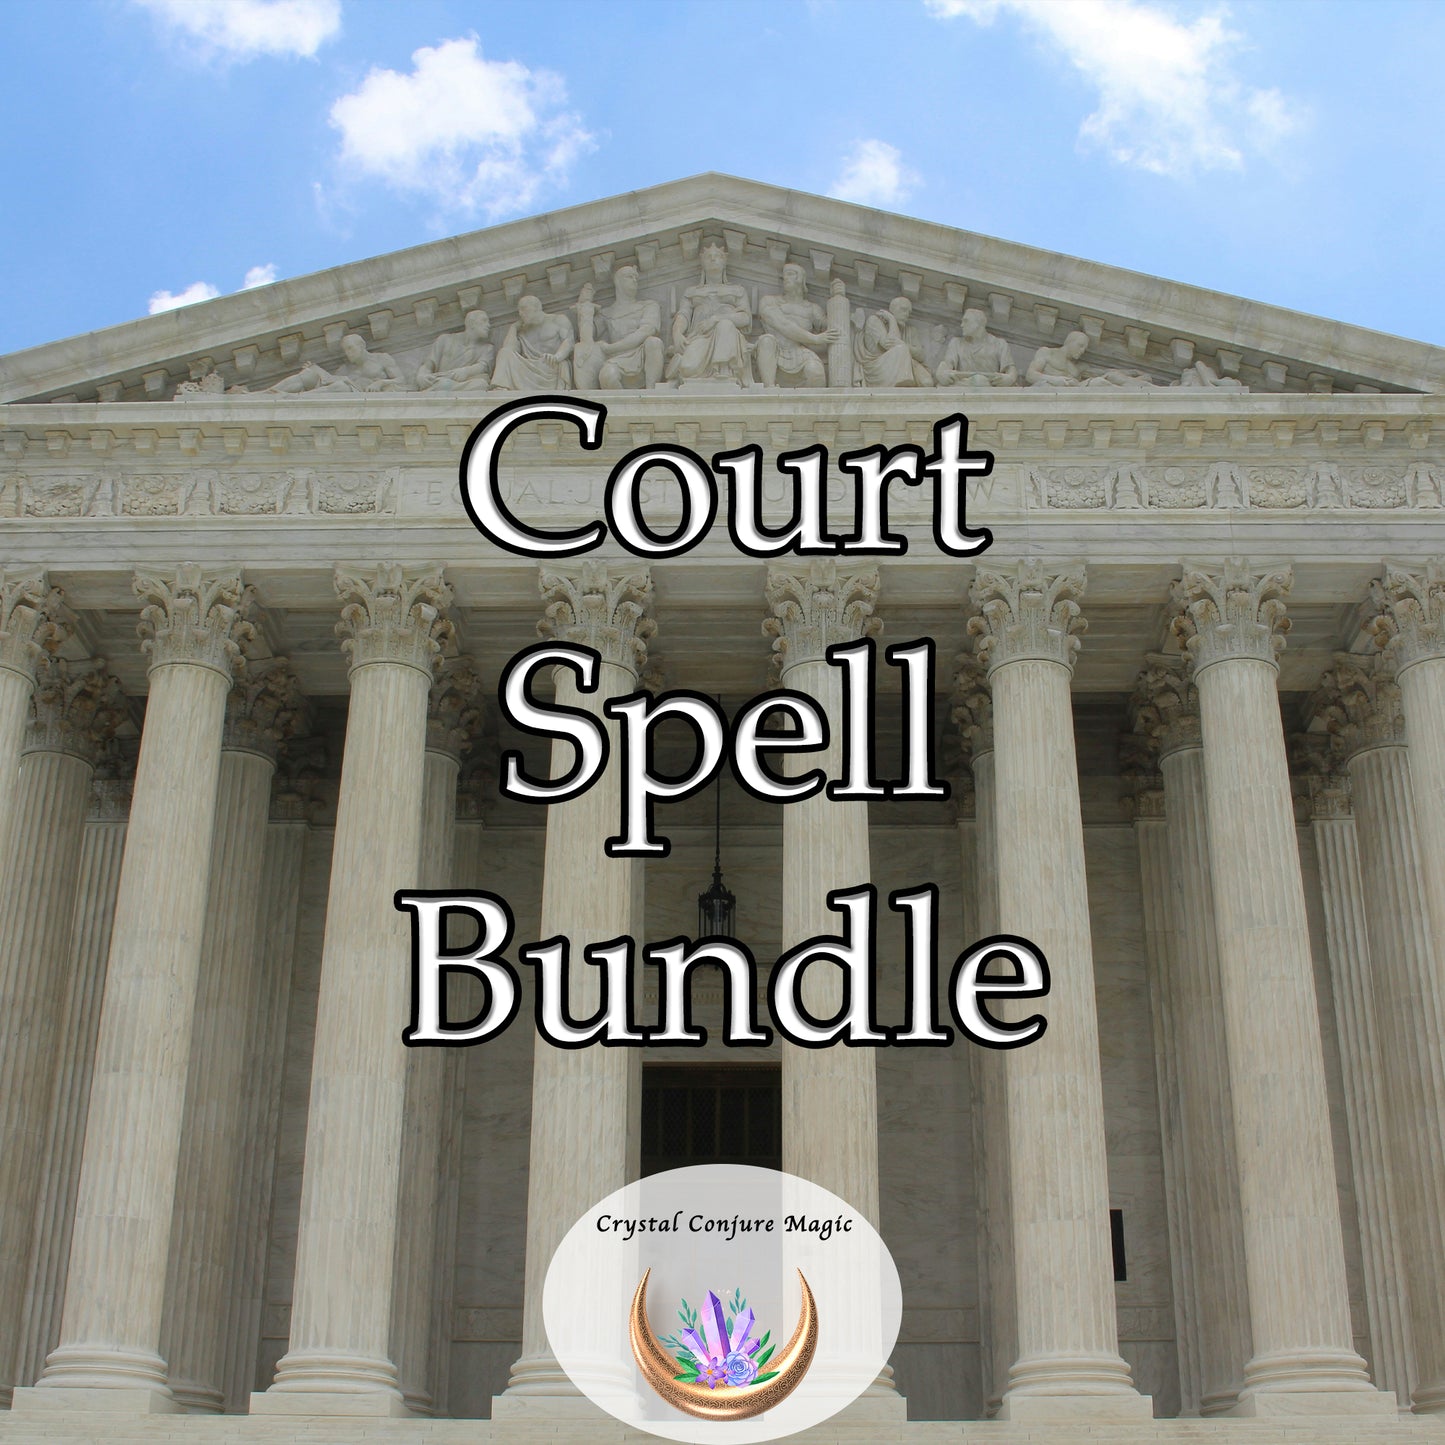 Court Spell Bundle - turn the tides in your favor and let the forces of righteousness prevail